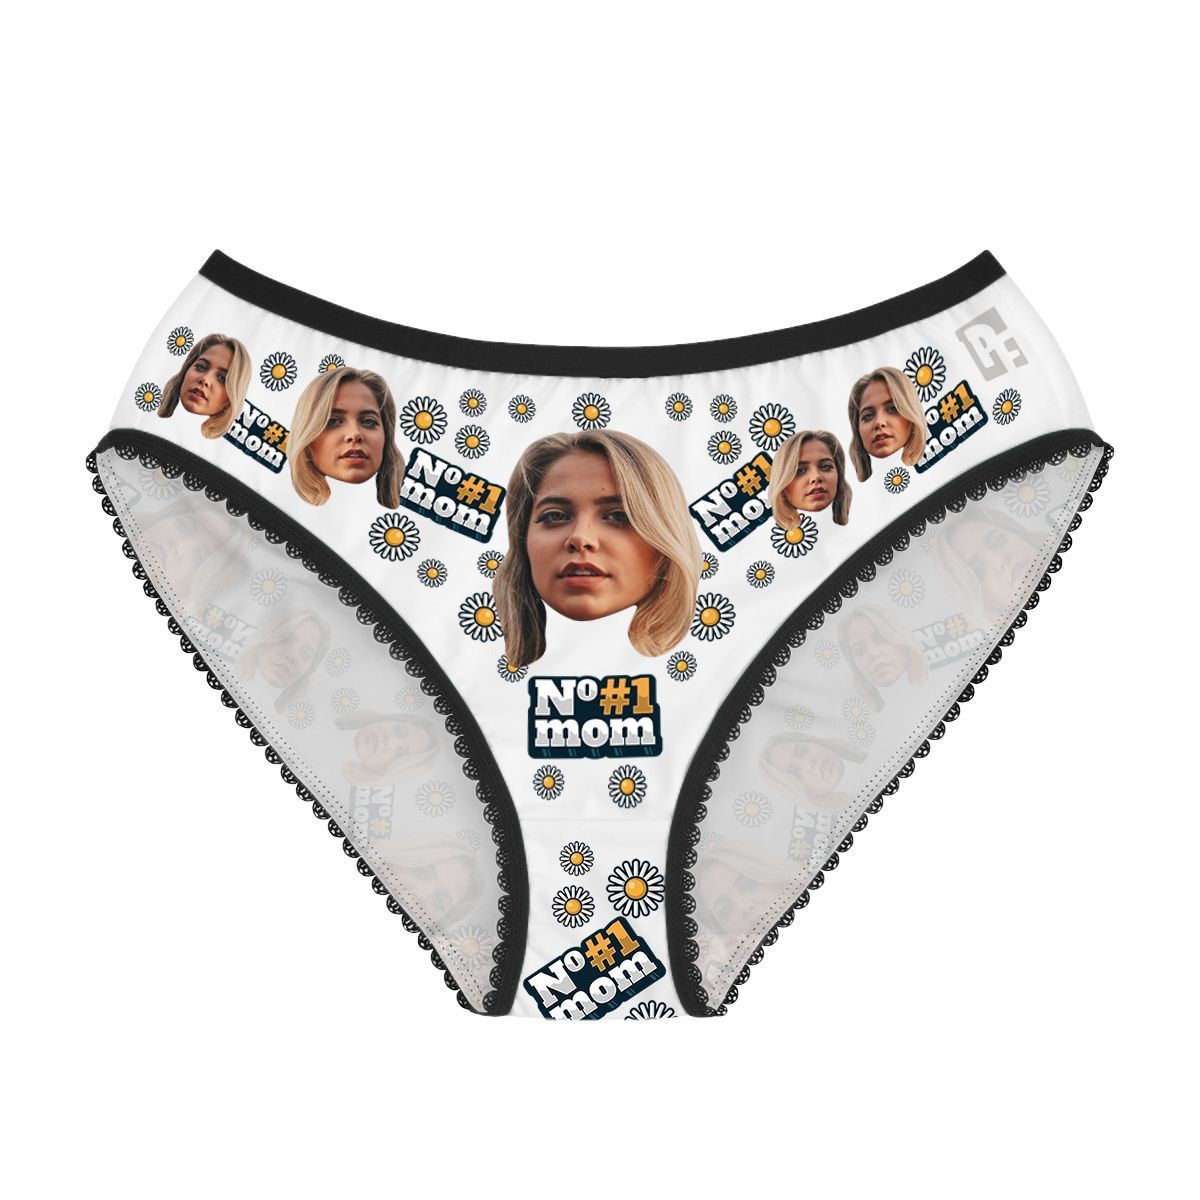 White #1 Mom women's underwear briefs personalized with photo printed on them